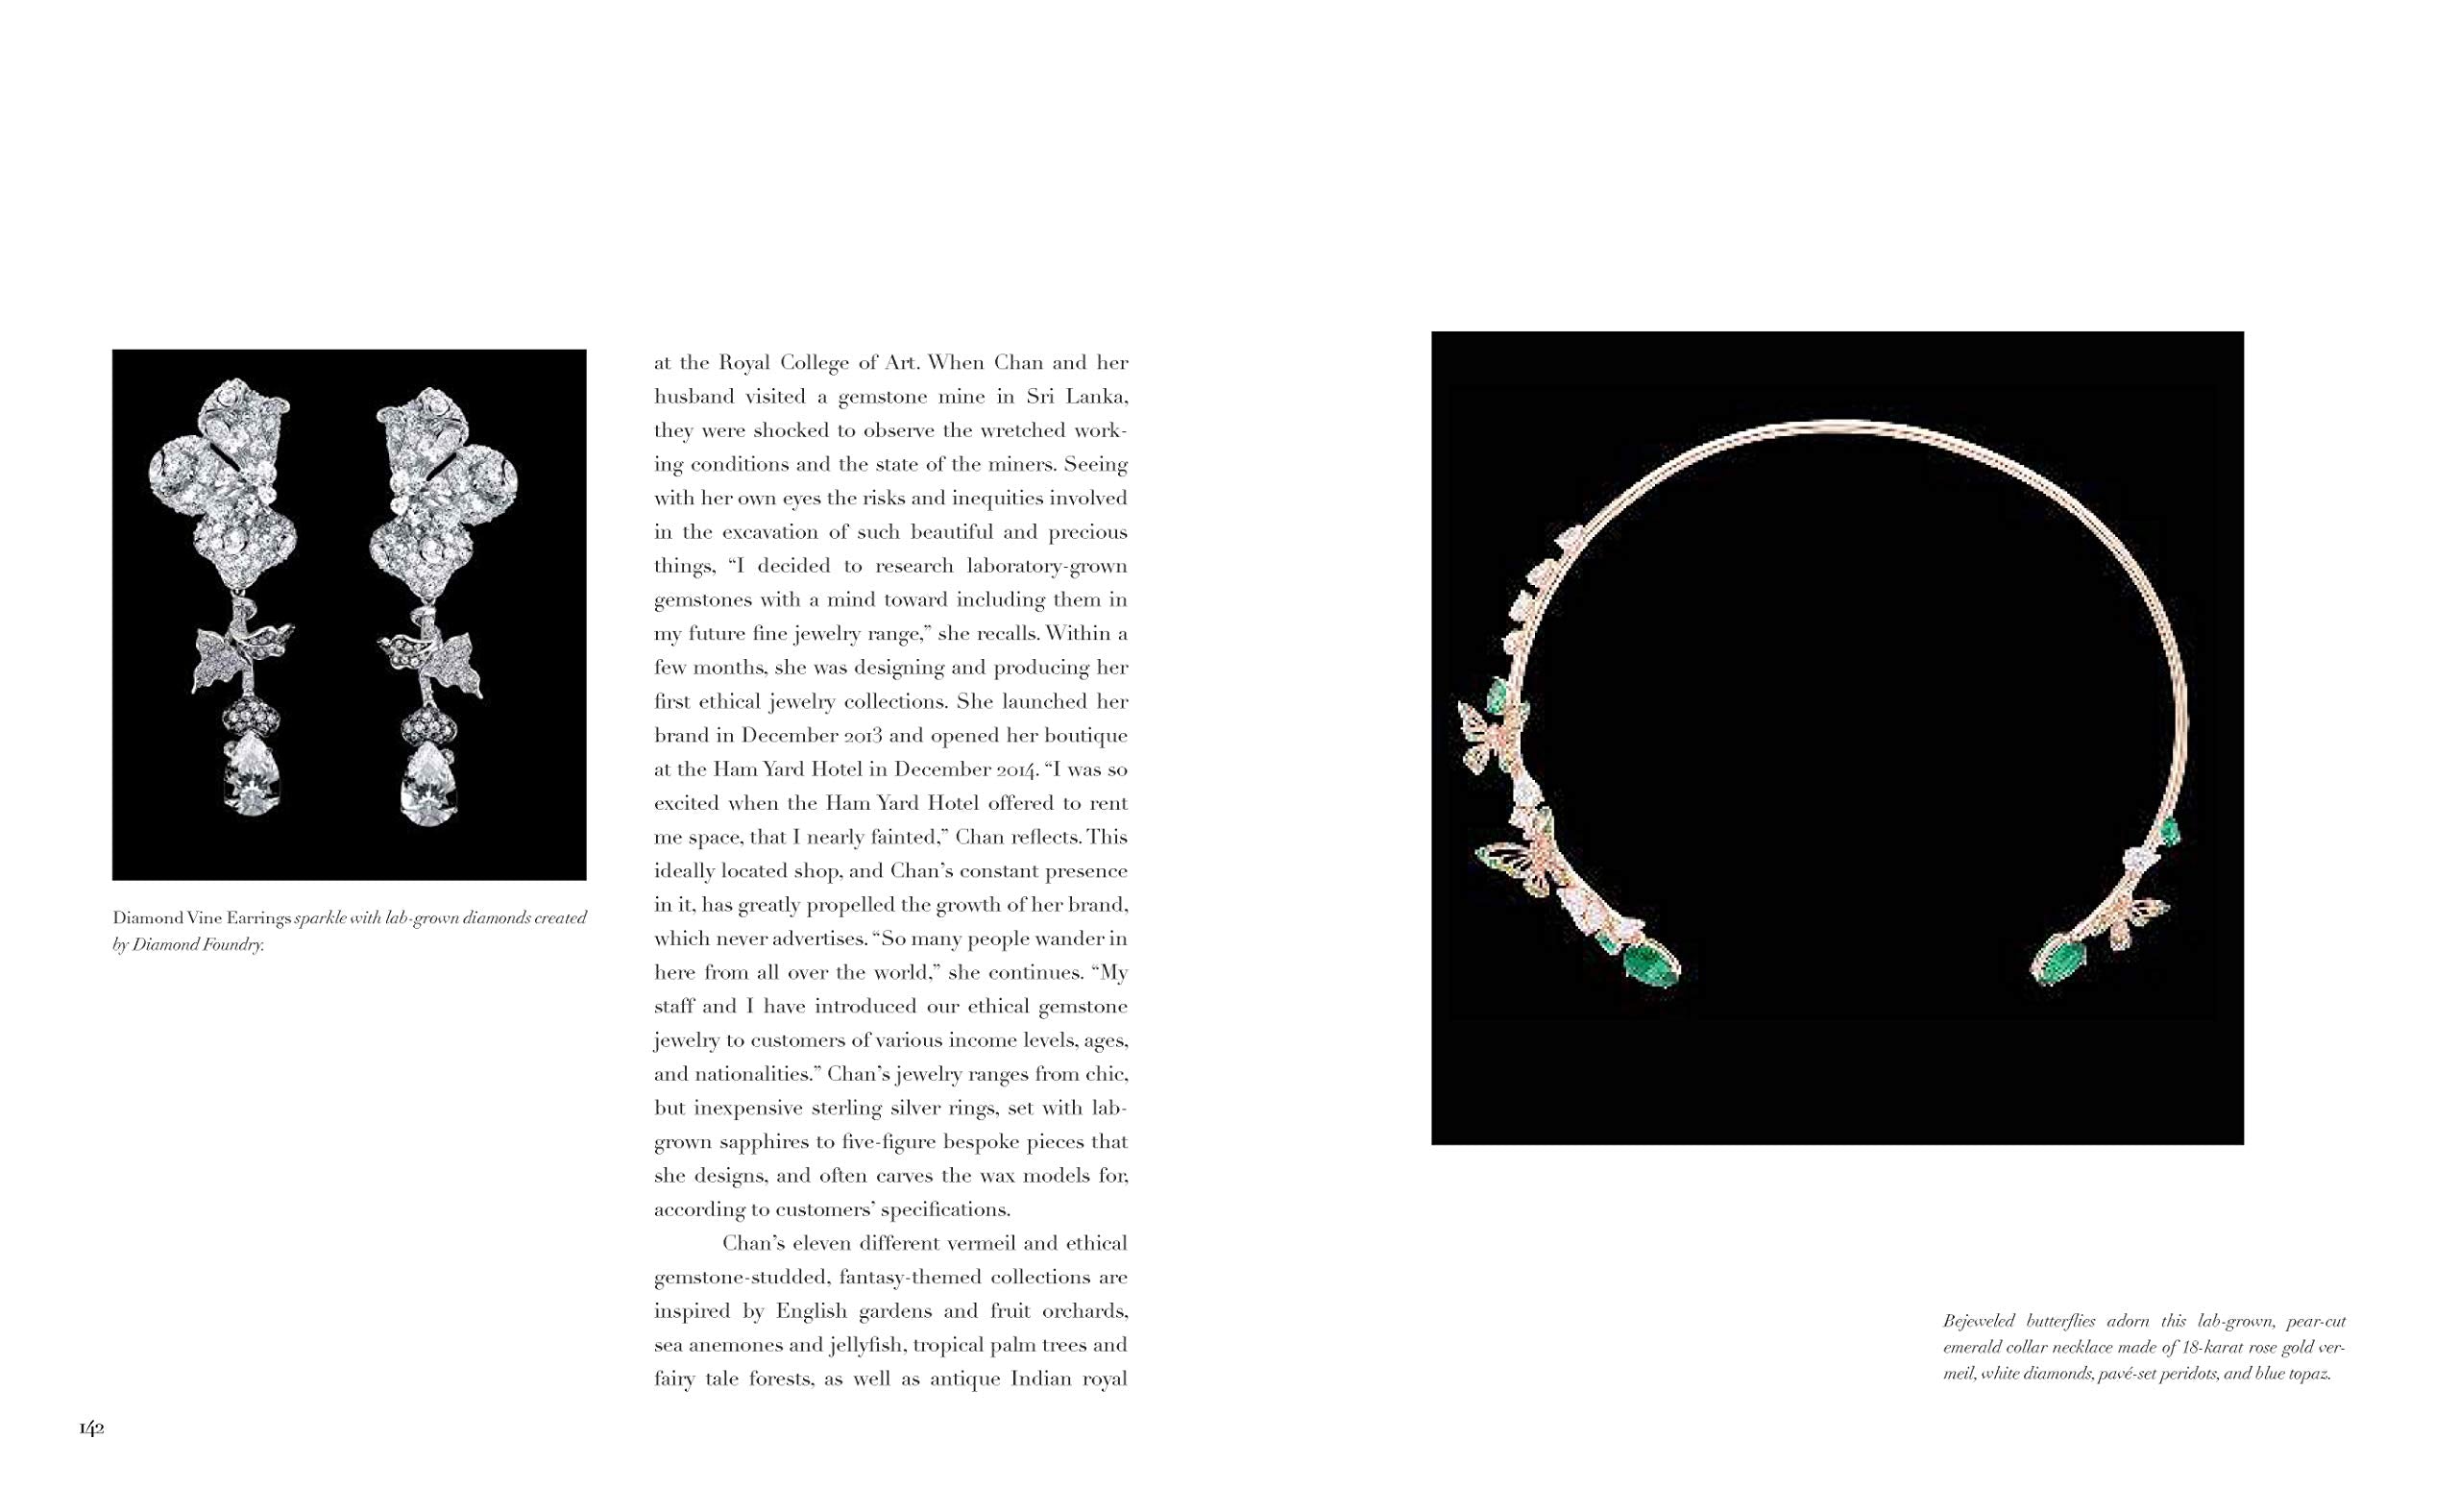 Bejeweled . The World of Ethical Jewelry, Publication, Anabela Chan Joaillerie - Fine jewelry with laboratory grown and created gemstones hand-crafted in the United Kingdom. Anabela Chan Joaillerie is the first fine jewellery brand in the world to champion laboratory-grown and created gemstones with high jewellery design, artisanal craftsmanship and a focus on ethical and sustainable innovations.